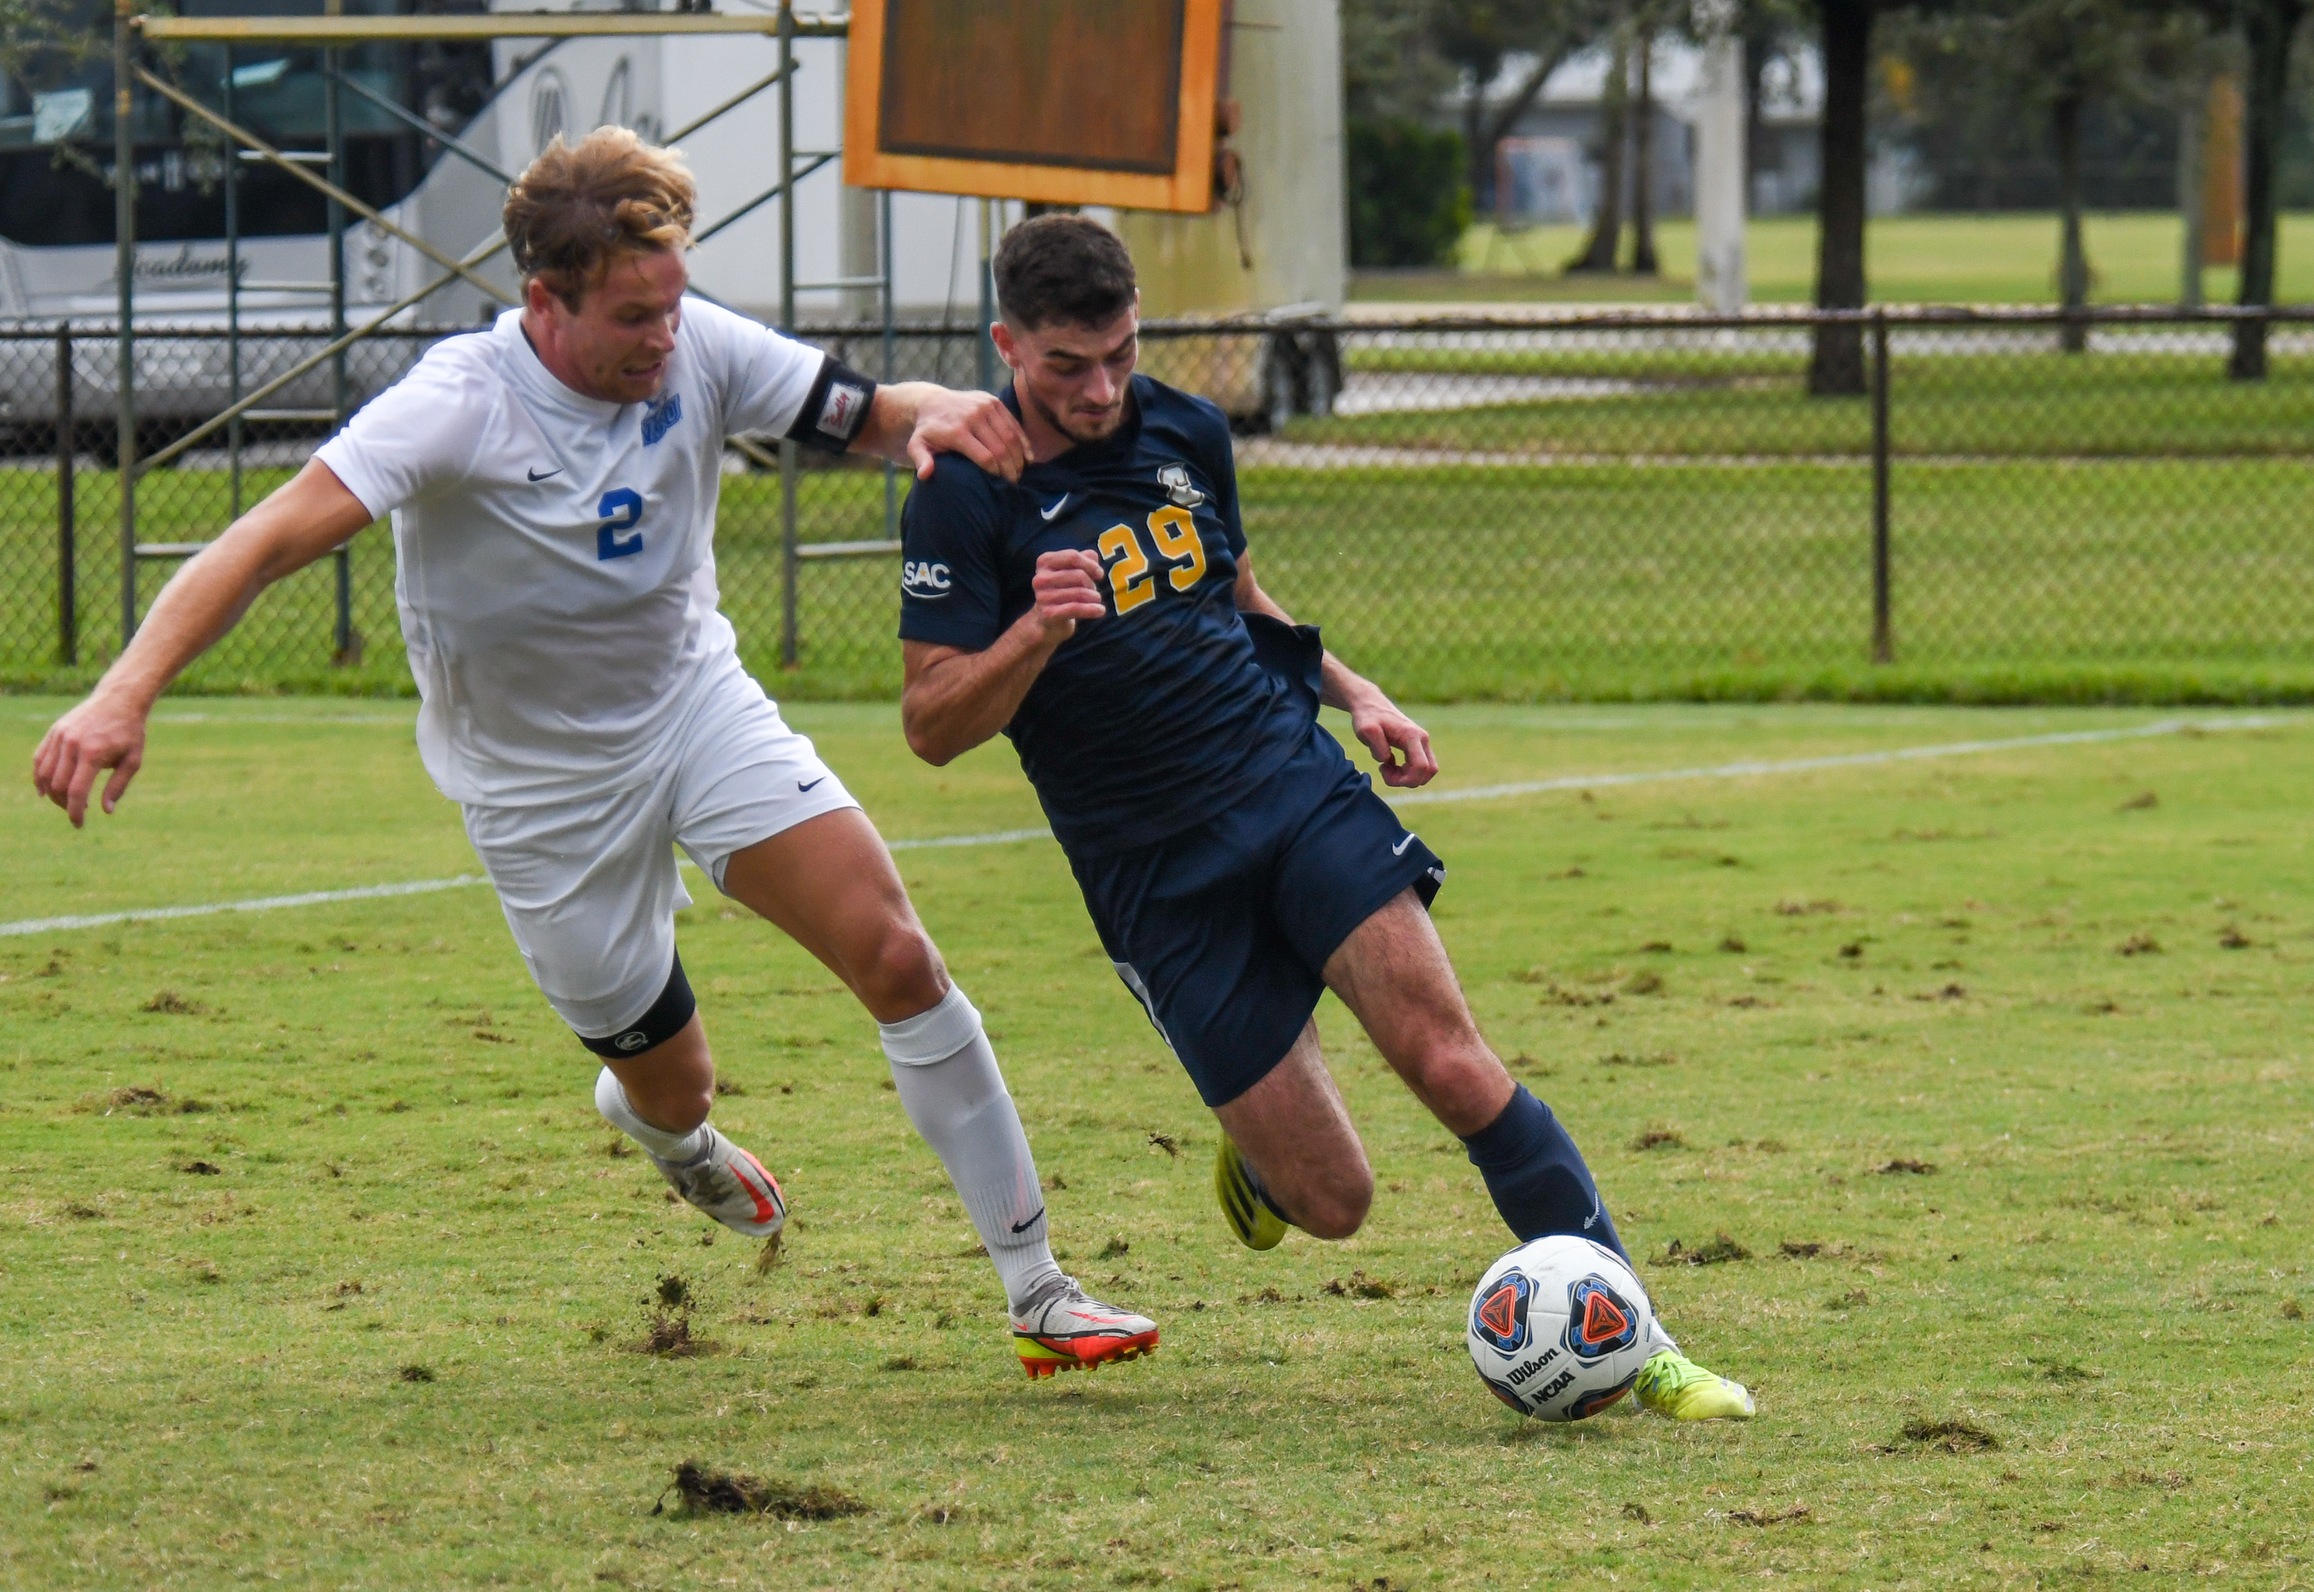 Cobras Compete for 1-1 draw with Trojans during Conference Play Saturday Night.